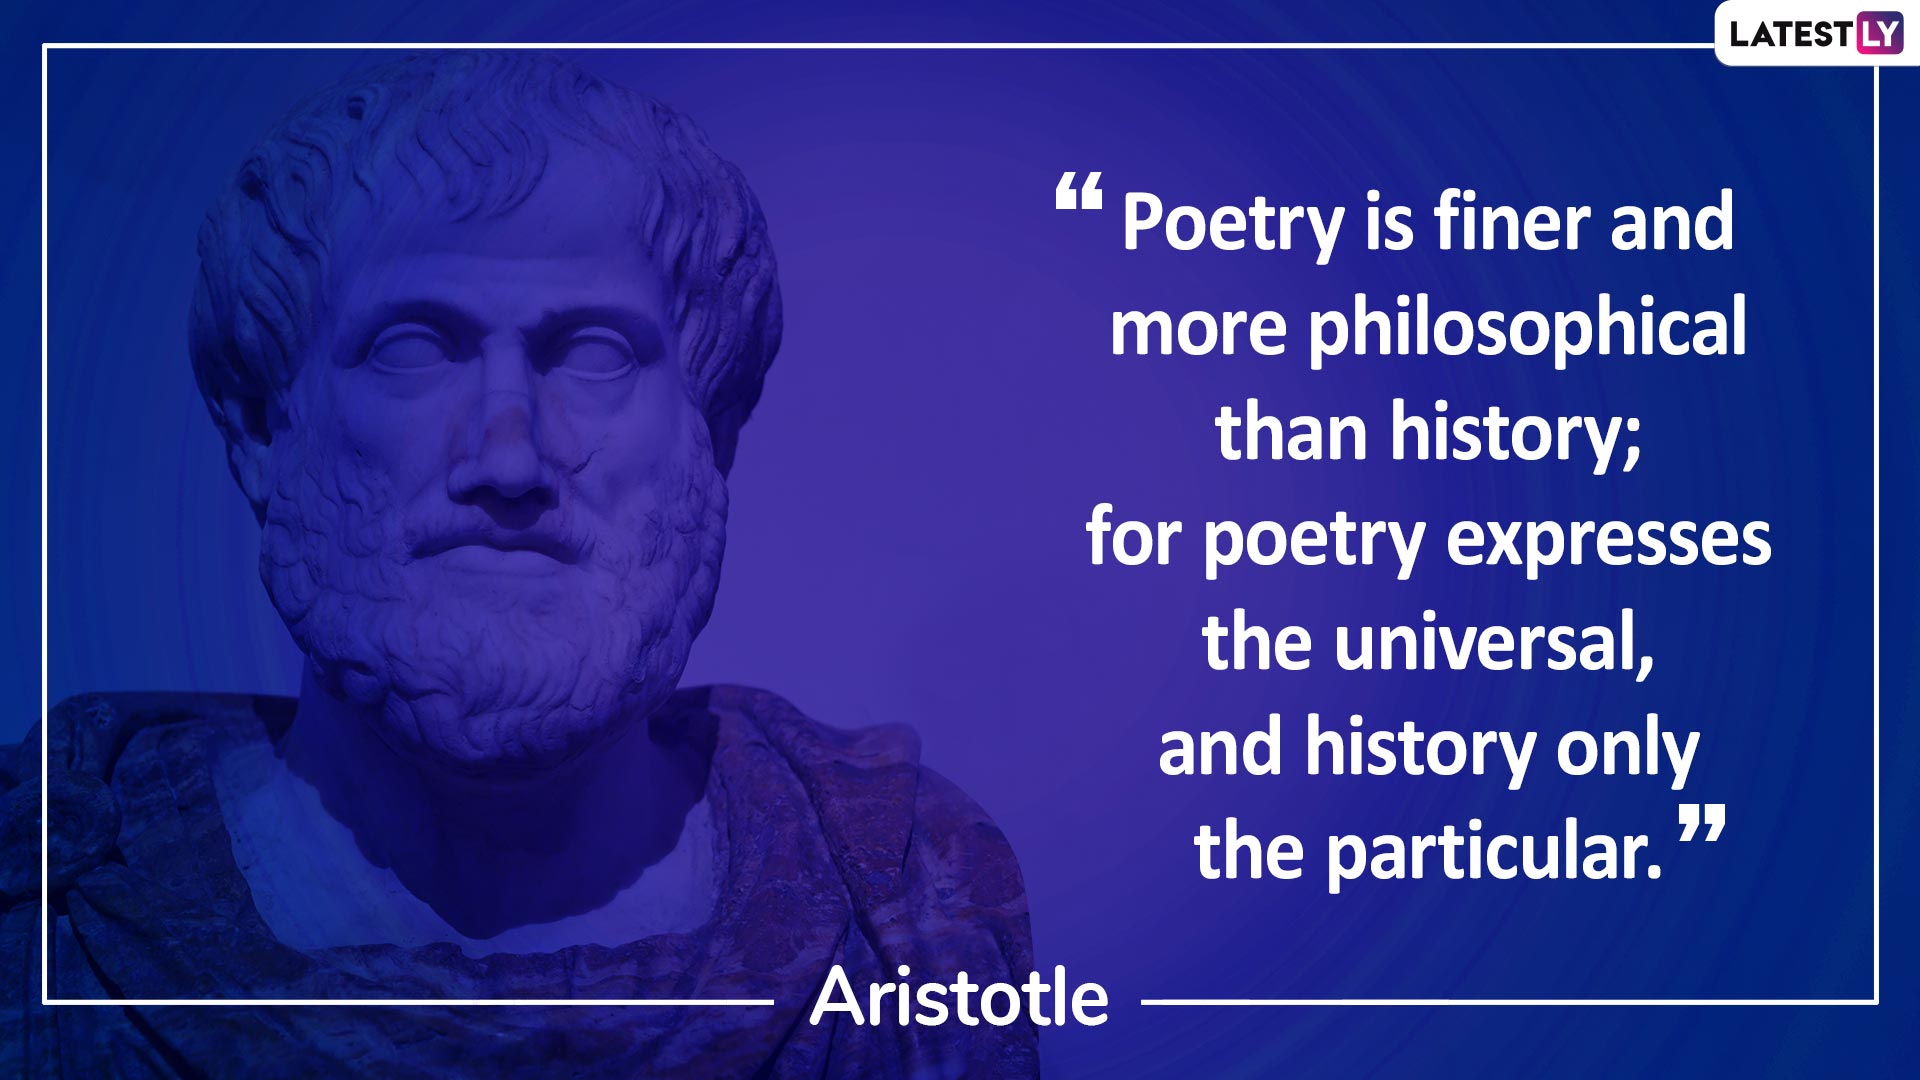 World Poetry Day 2020 Quotes And Lines By Famous Poets That Describe